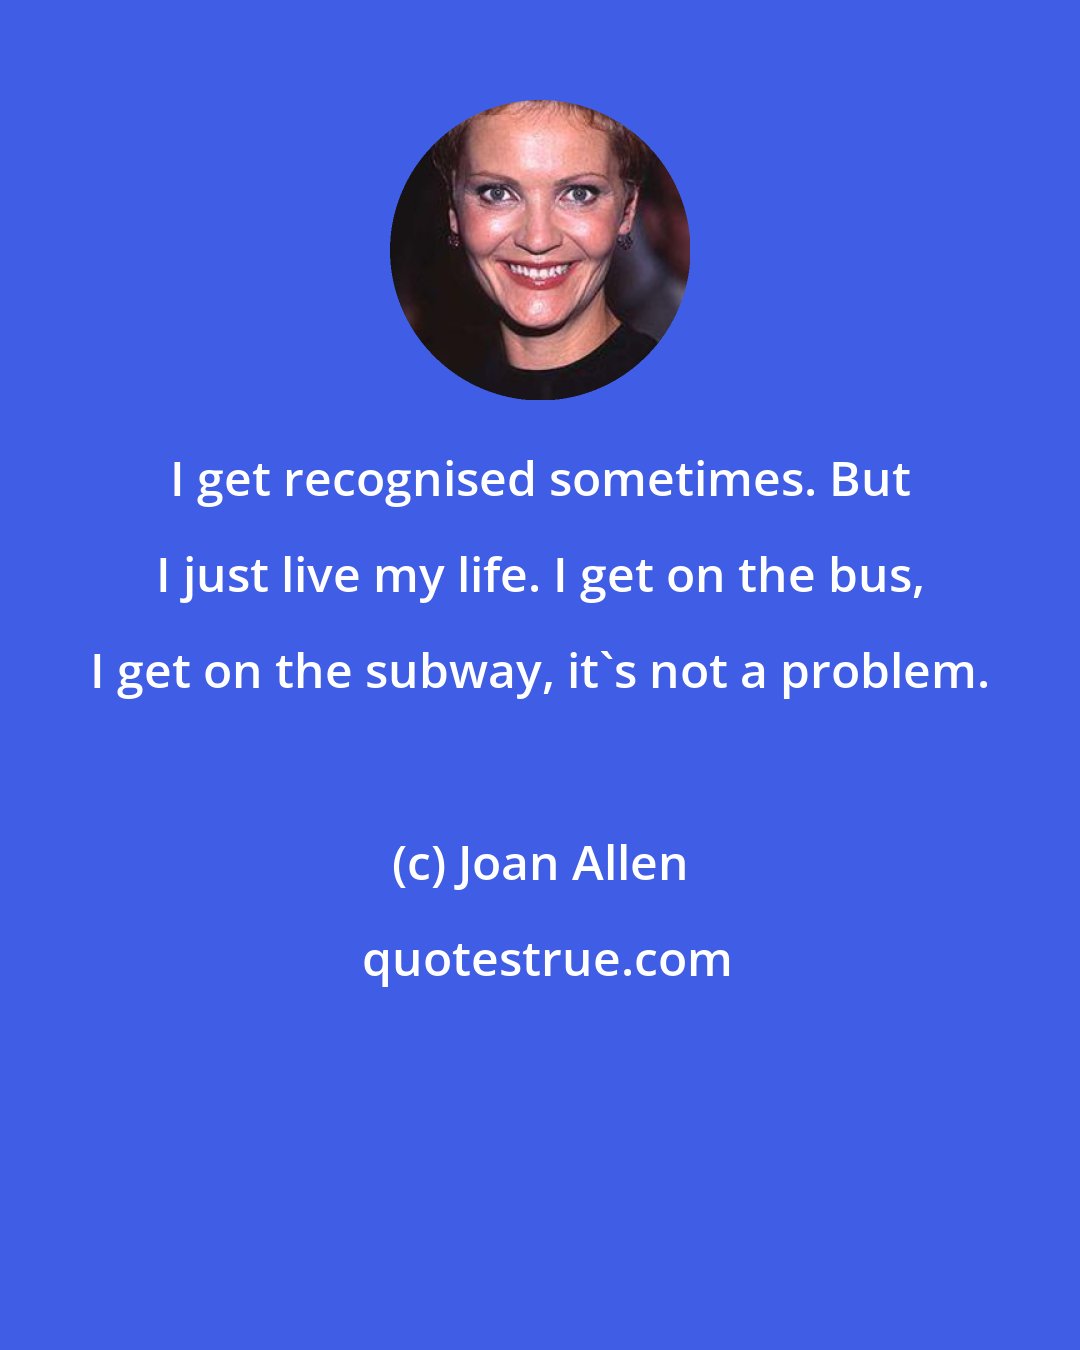 Joan Allen: I get recognised sometimes. But I just live my life. I get on the bus, I get on the subway, it's not a problem.